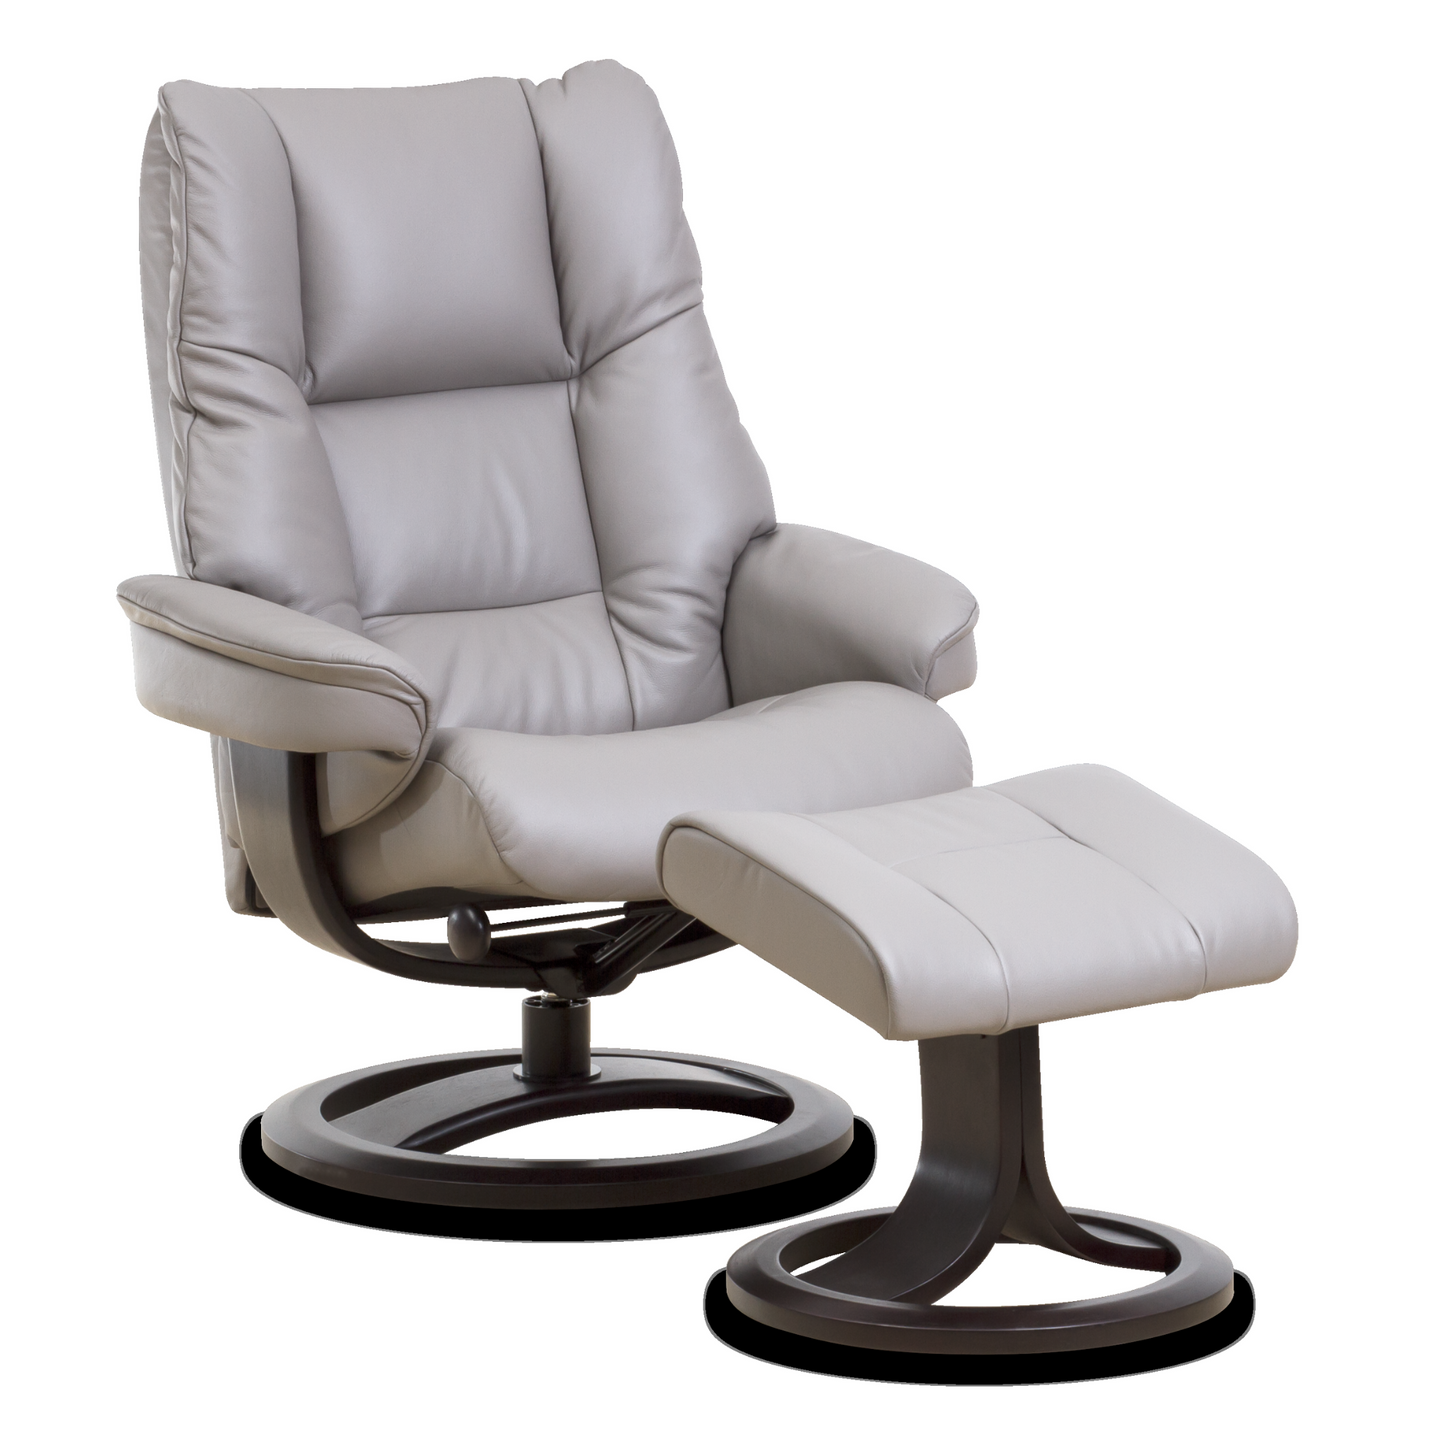 Nordic 60 Large Recliner Chair with Ottoman by IMG